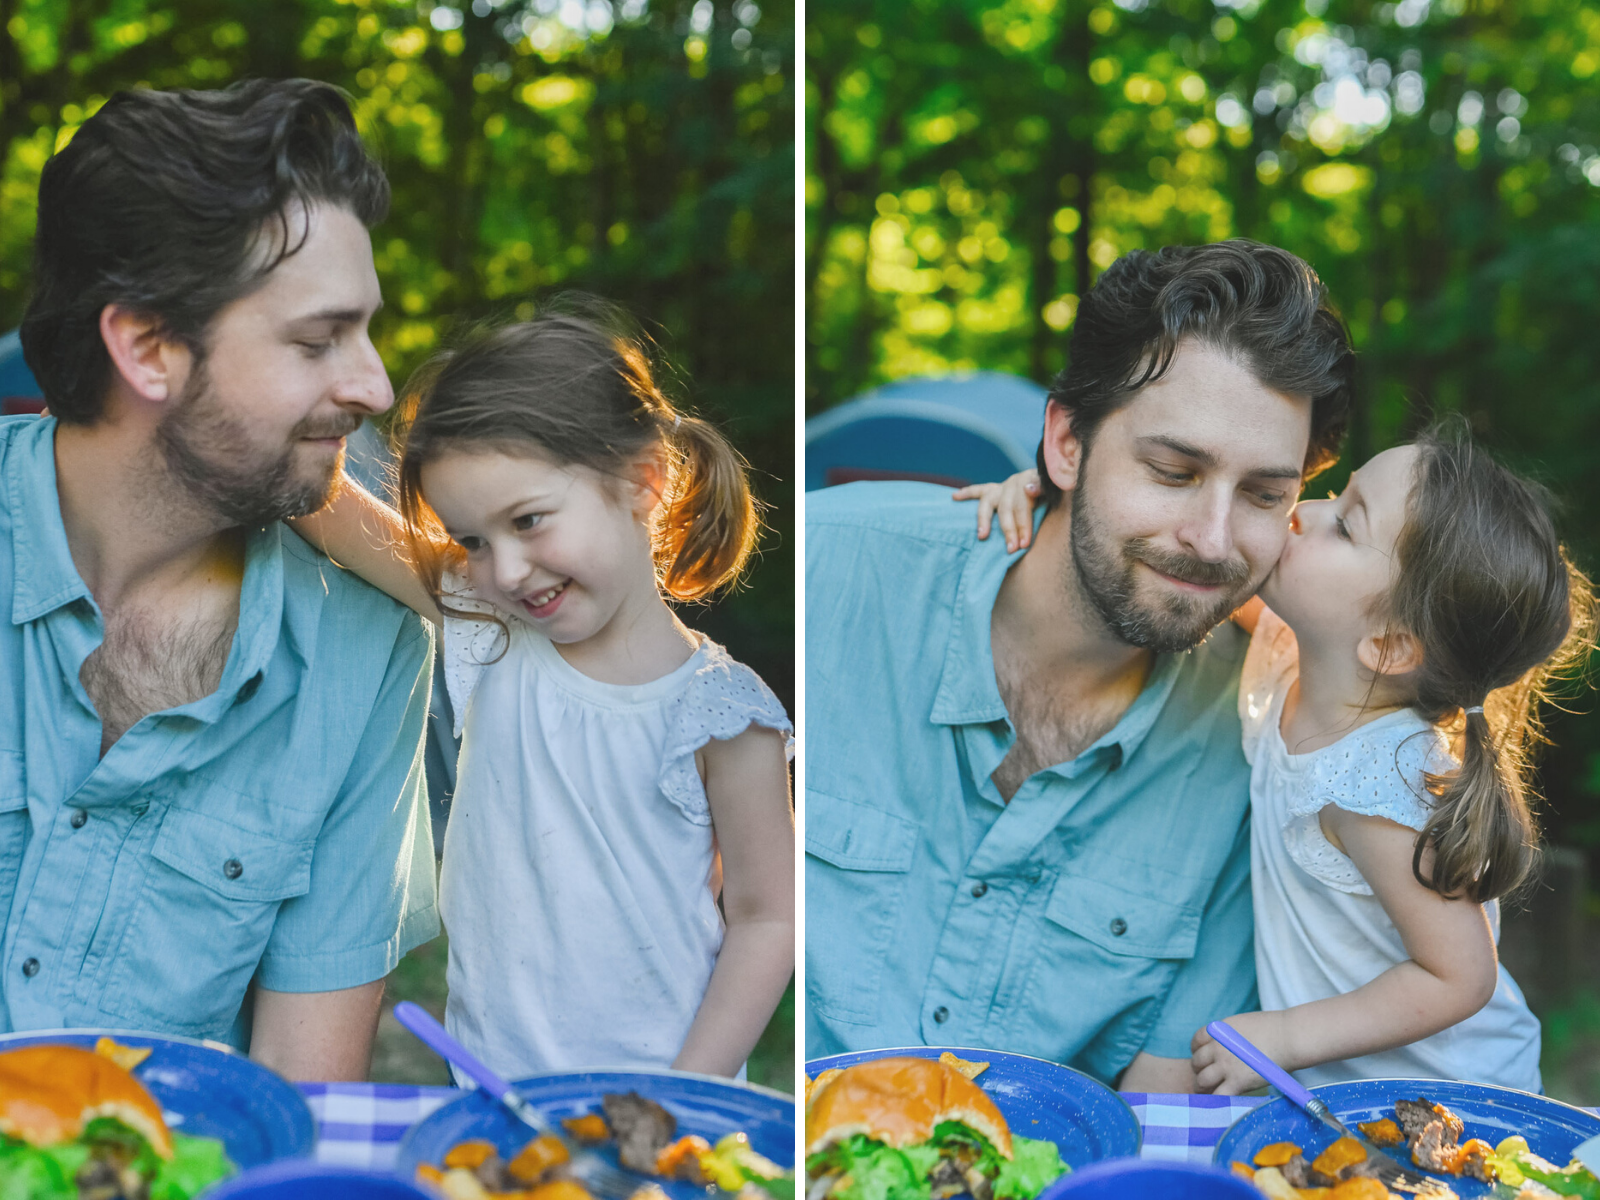 Father's Day Gift Ideas by popular Memphis lifestyle blog, Lone Star Looking Glass: image of a man wearing a Academy Sports Magellan Outdoors Men's Button Down shirt and eating off of Academy blue enamel wear plates with his daughter.